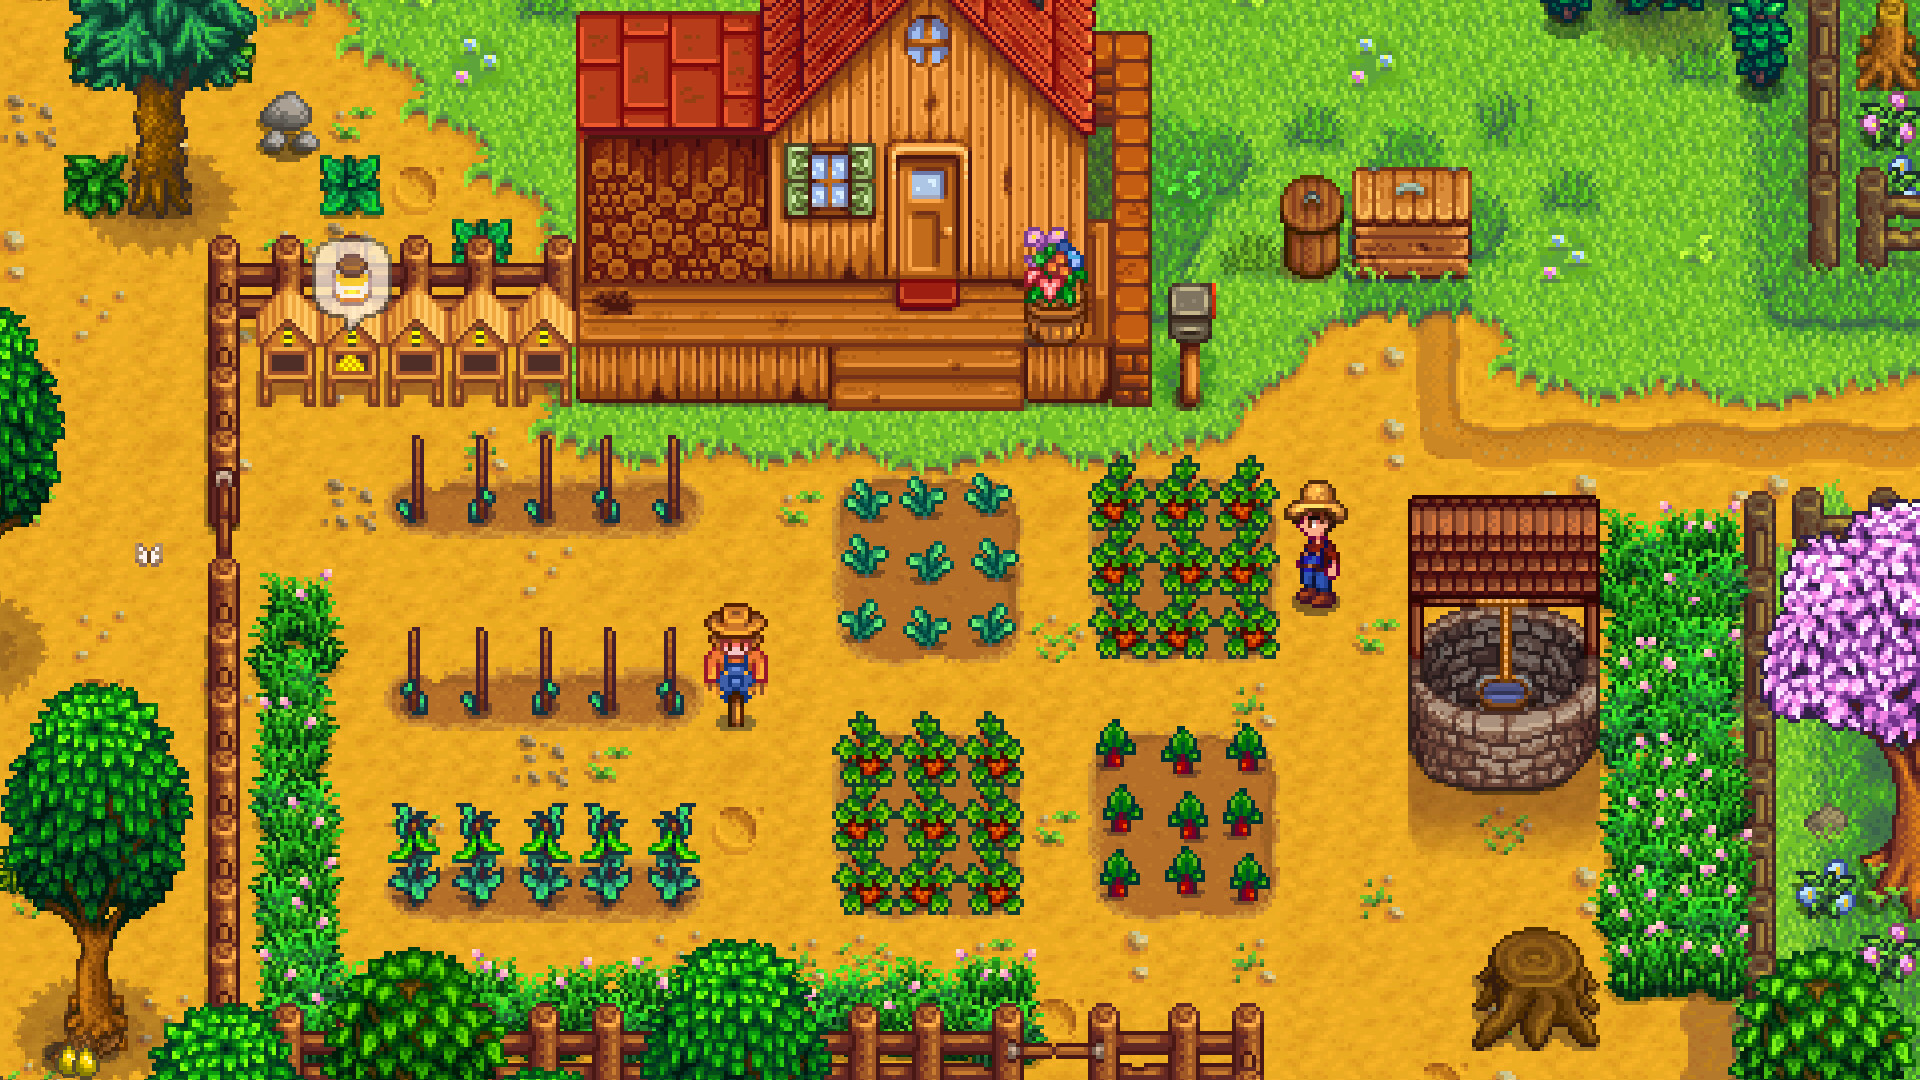 How to Get a Rabbit's Foot in Stardew Valley